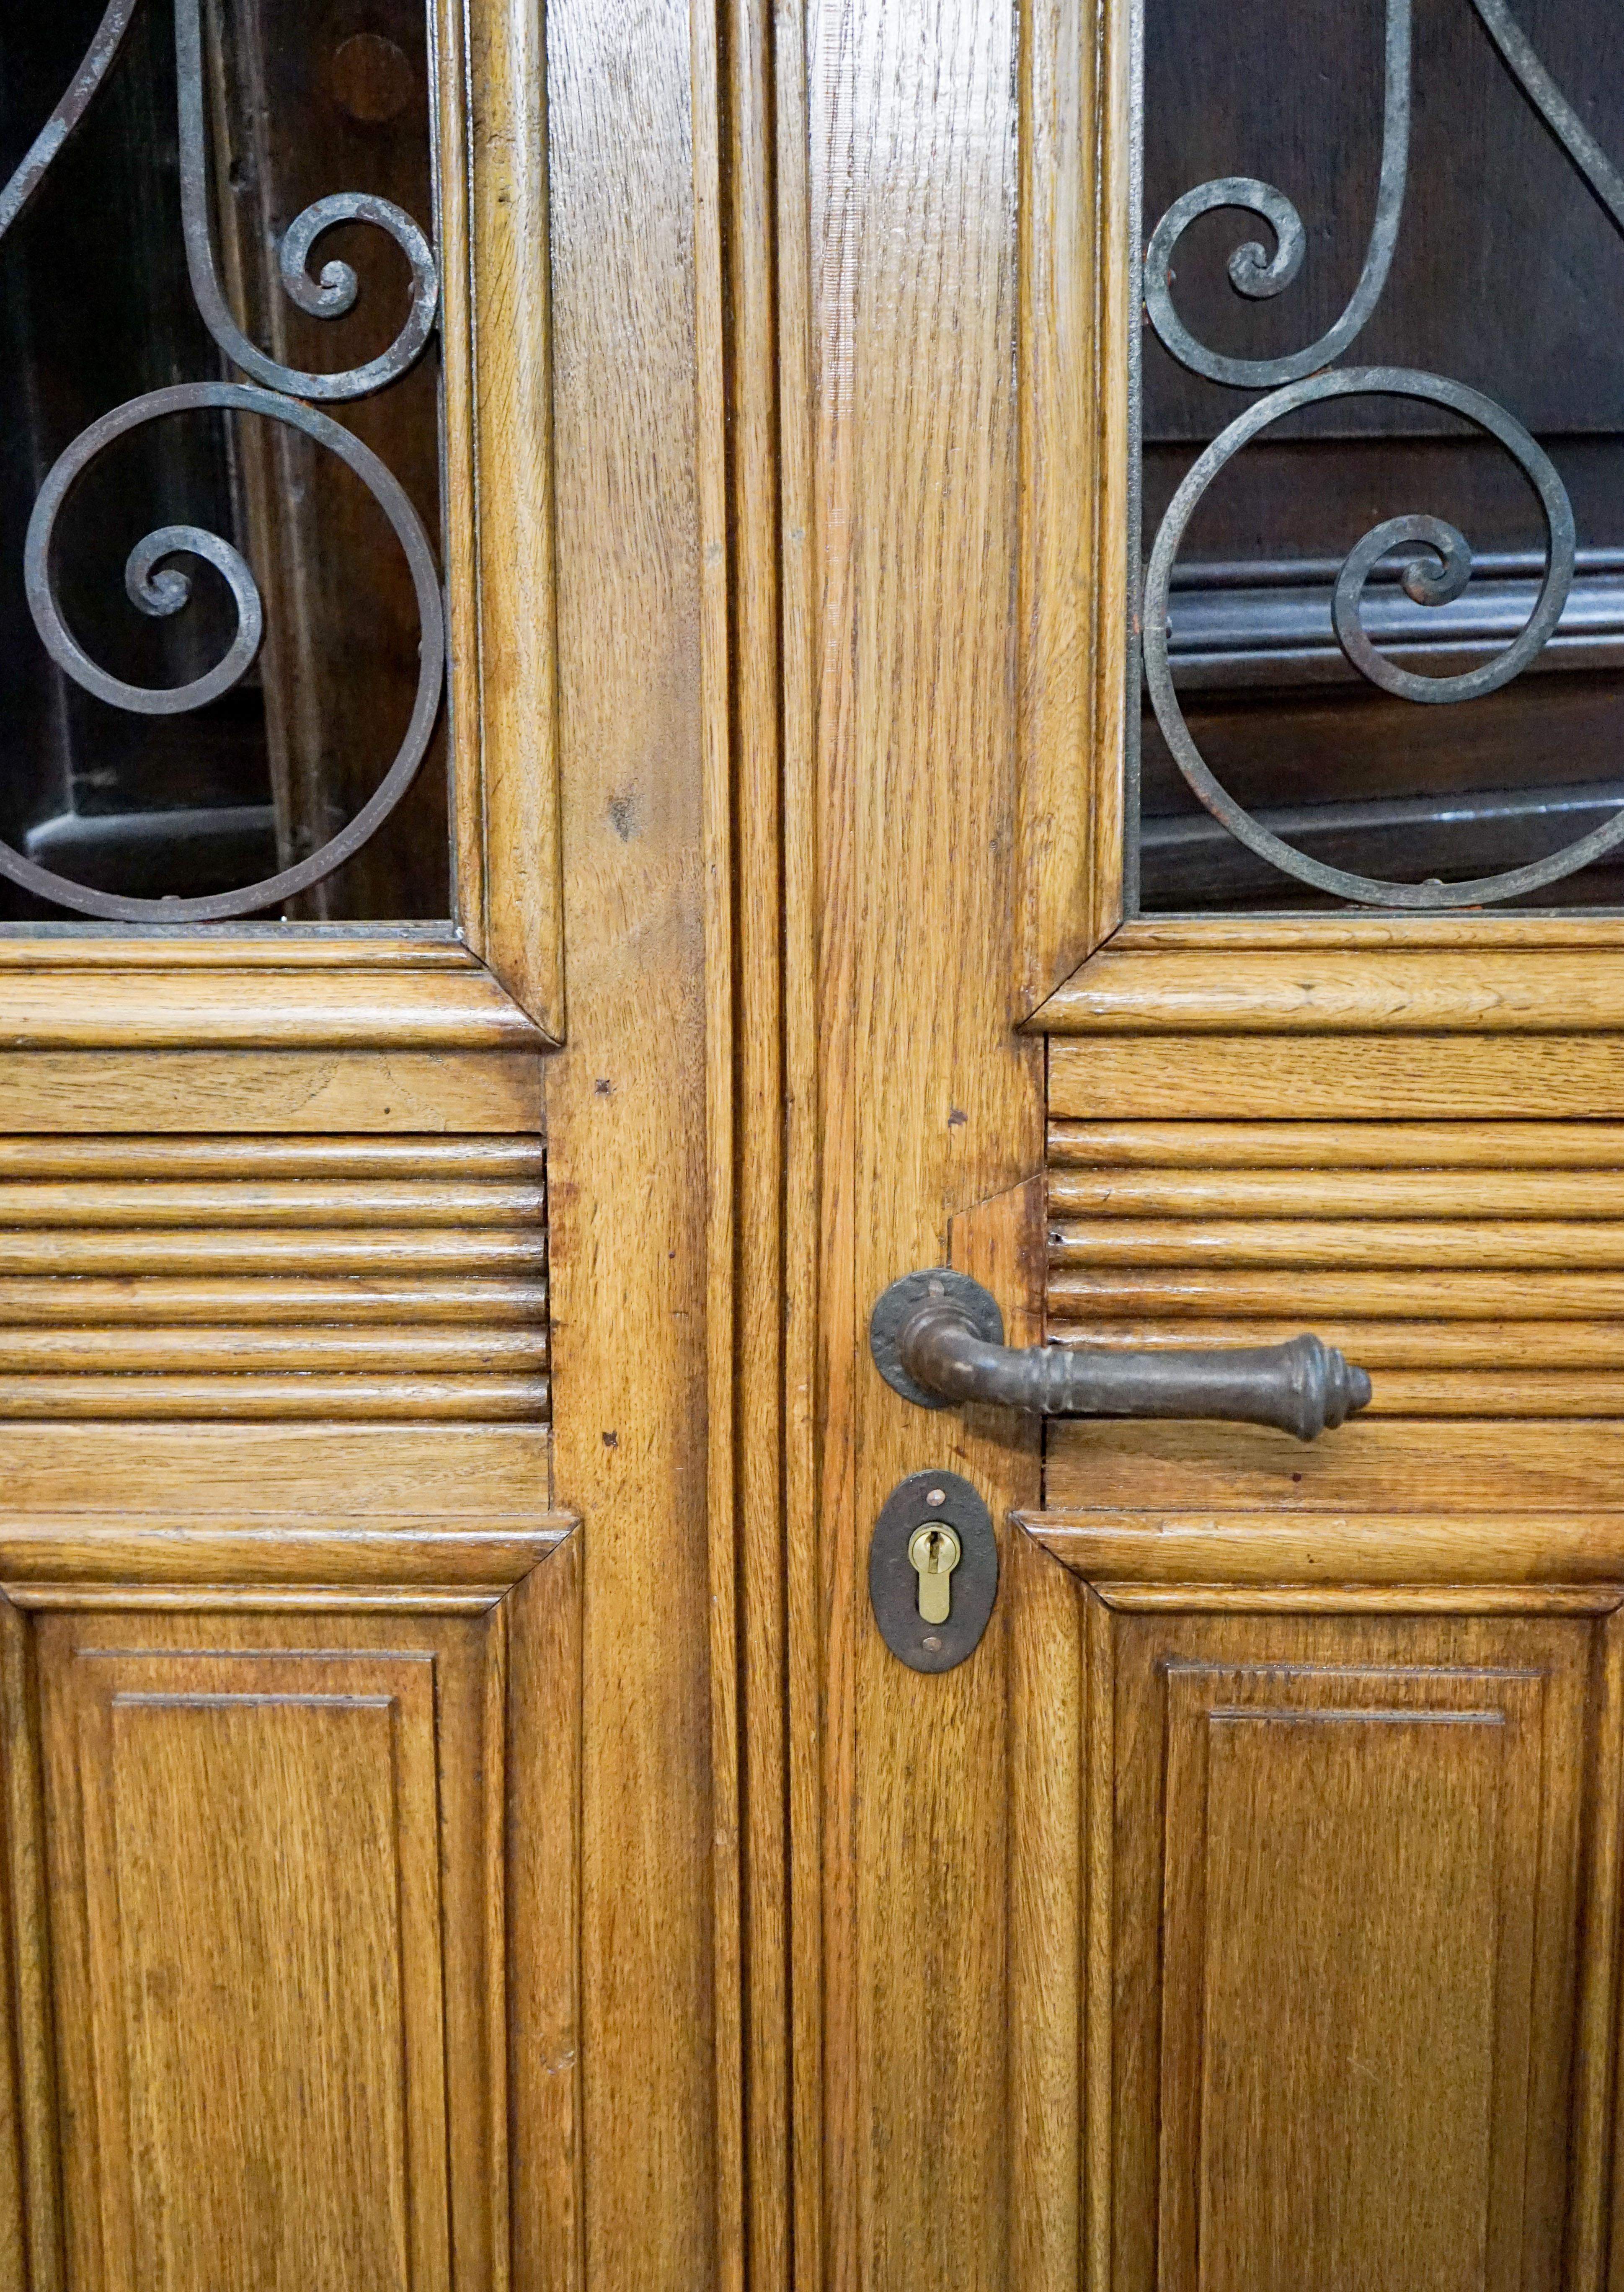 Antique double door from the Bordeaux region of France, circa 1890, made from oak with iron work windows. Ready for install with keys.